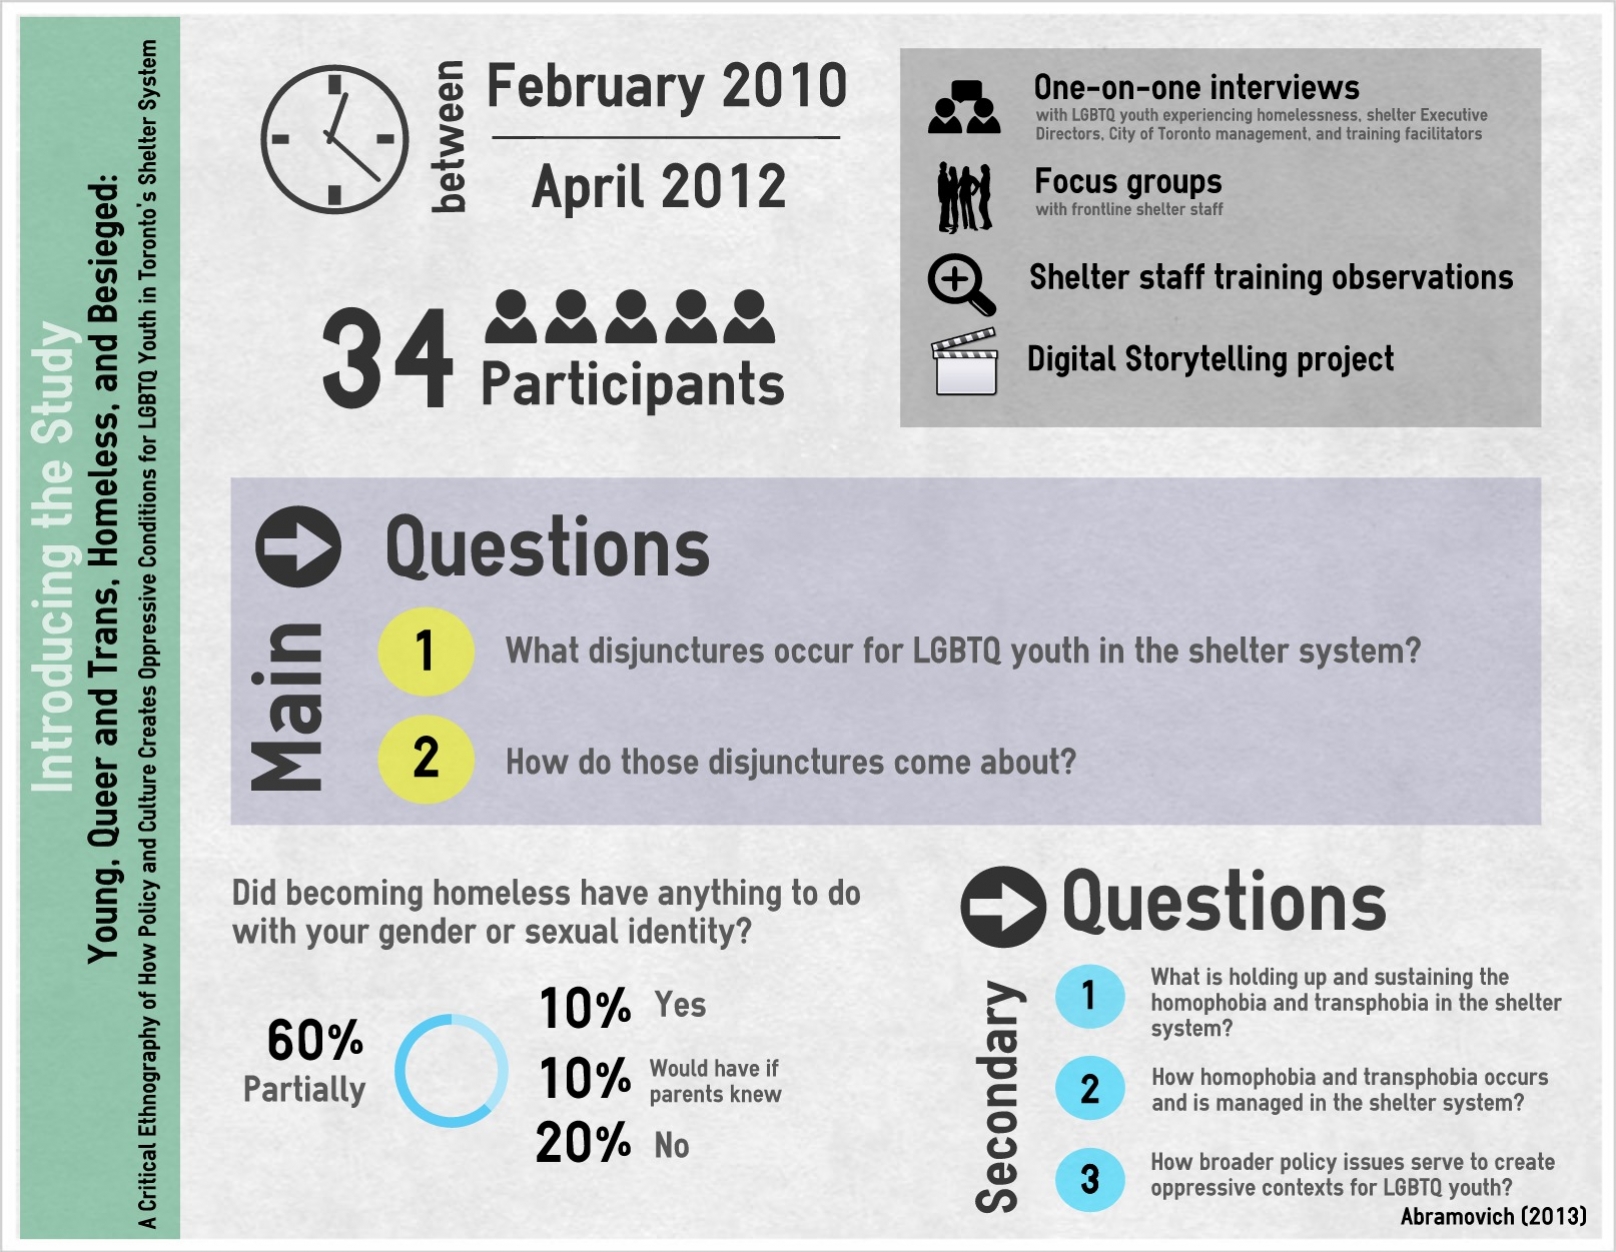 Introducing the Study. Main Questions: 1. What disjunctures occur for the LGBTQ youth in the shelter system. 2. How do those disjunctures come about?